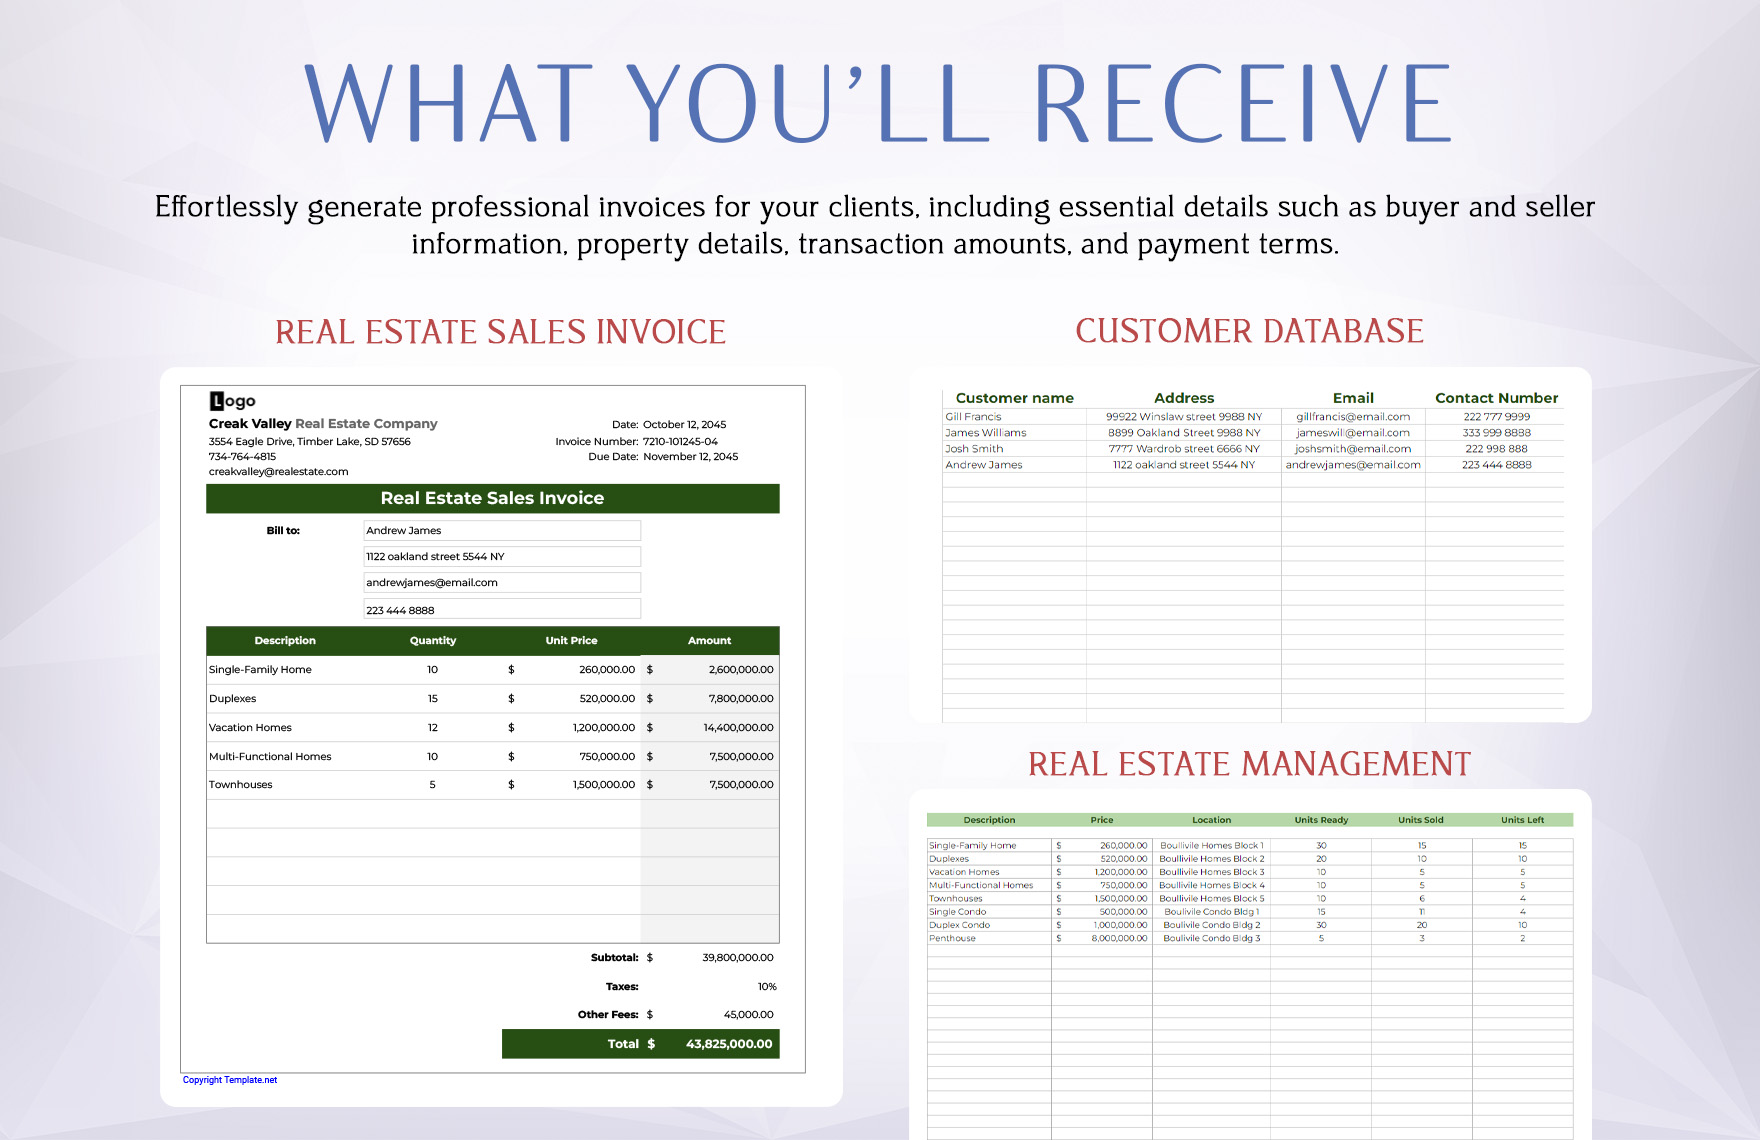 Real Estate Sales Invoice Template